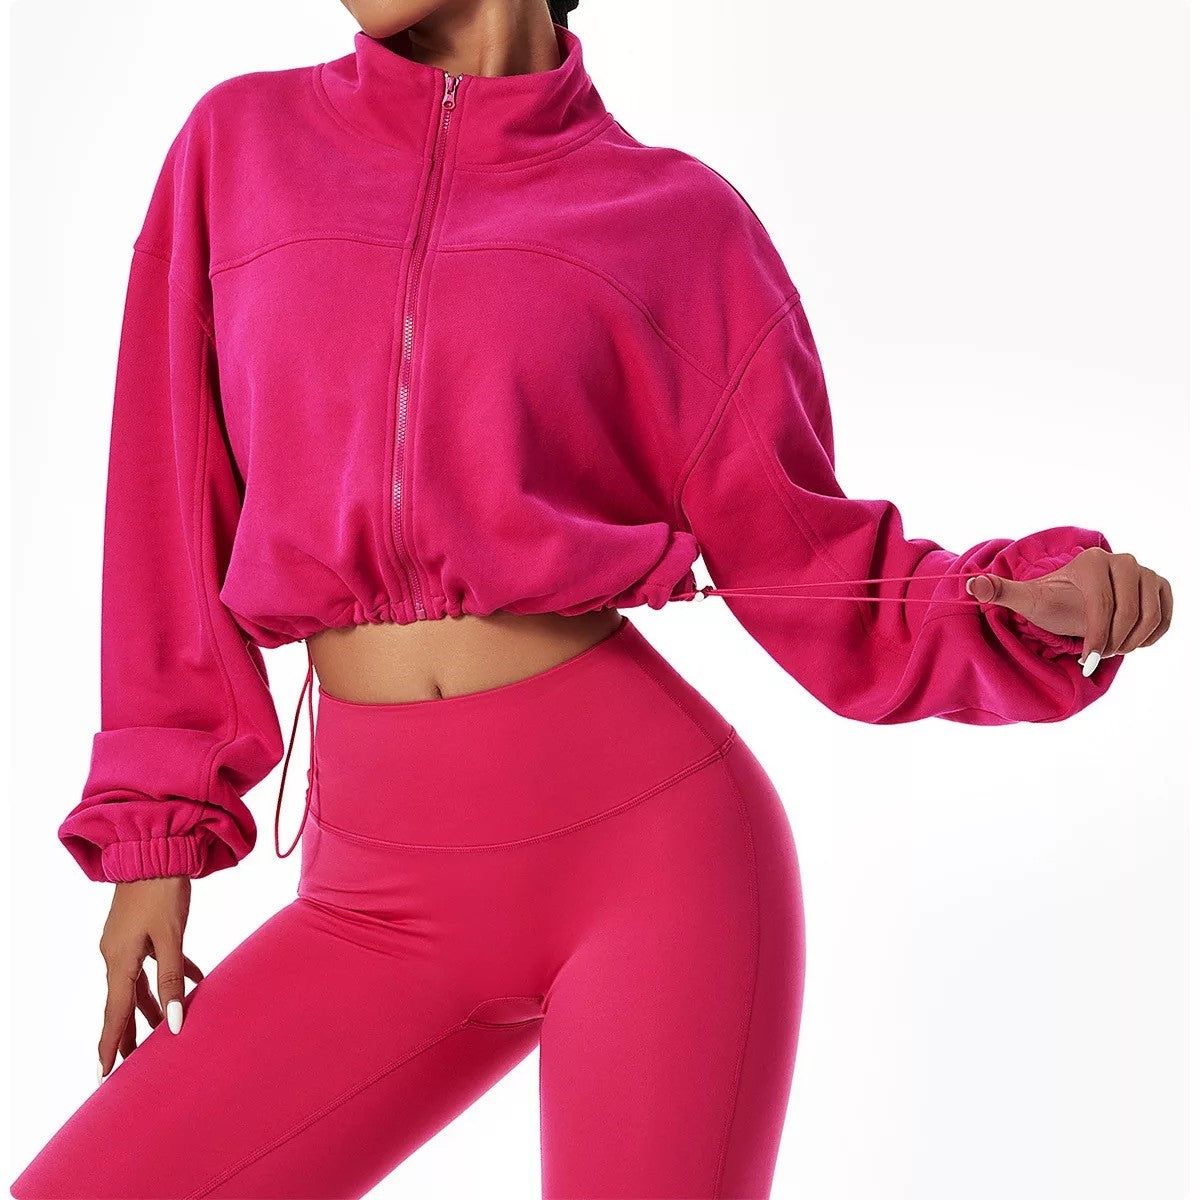 GymBabe Three Piece Set in Pink (Made with recycled material)